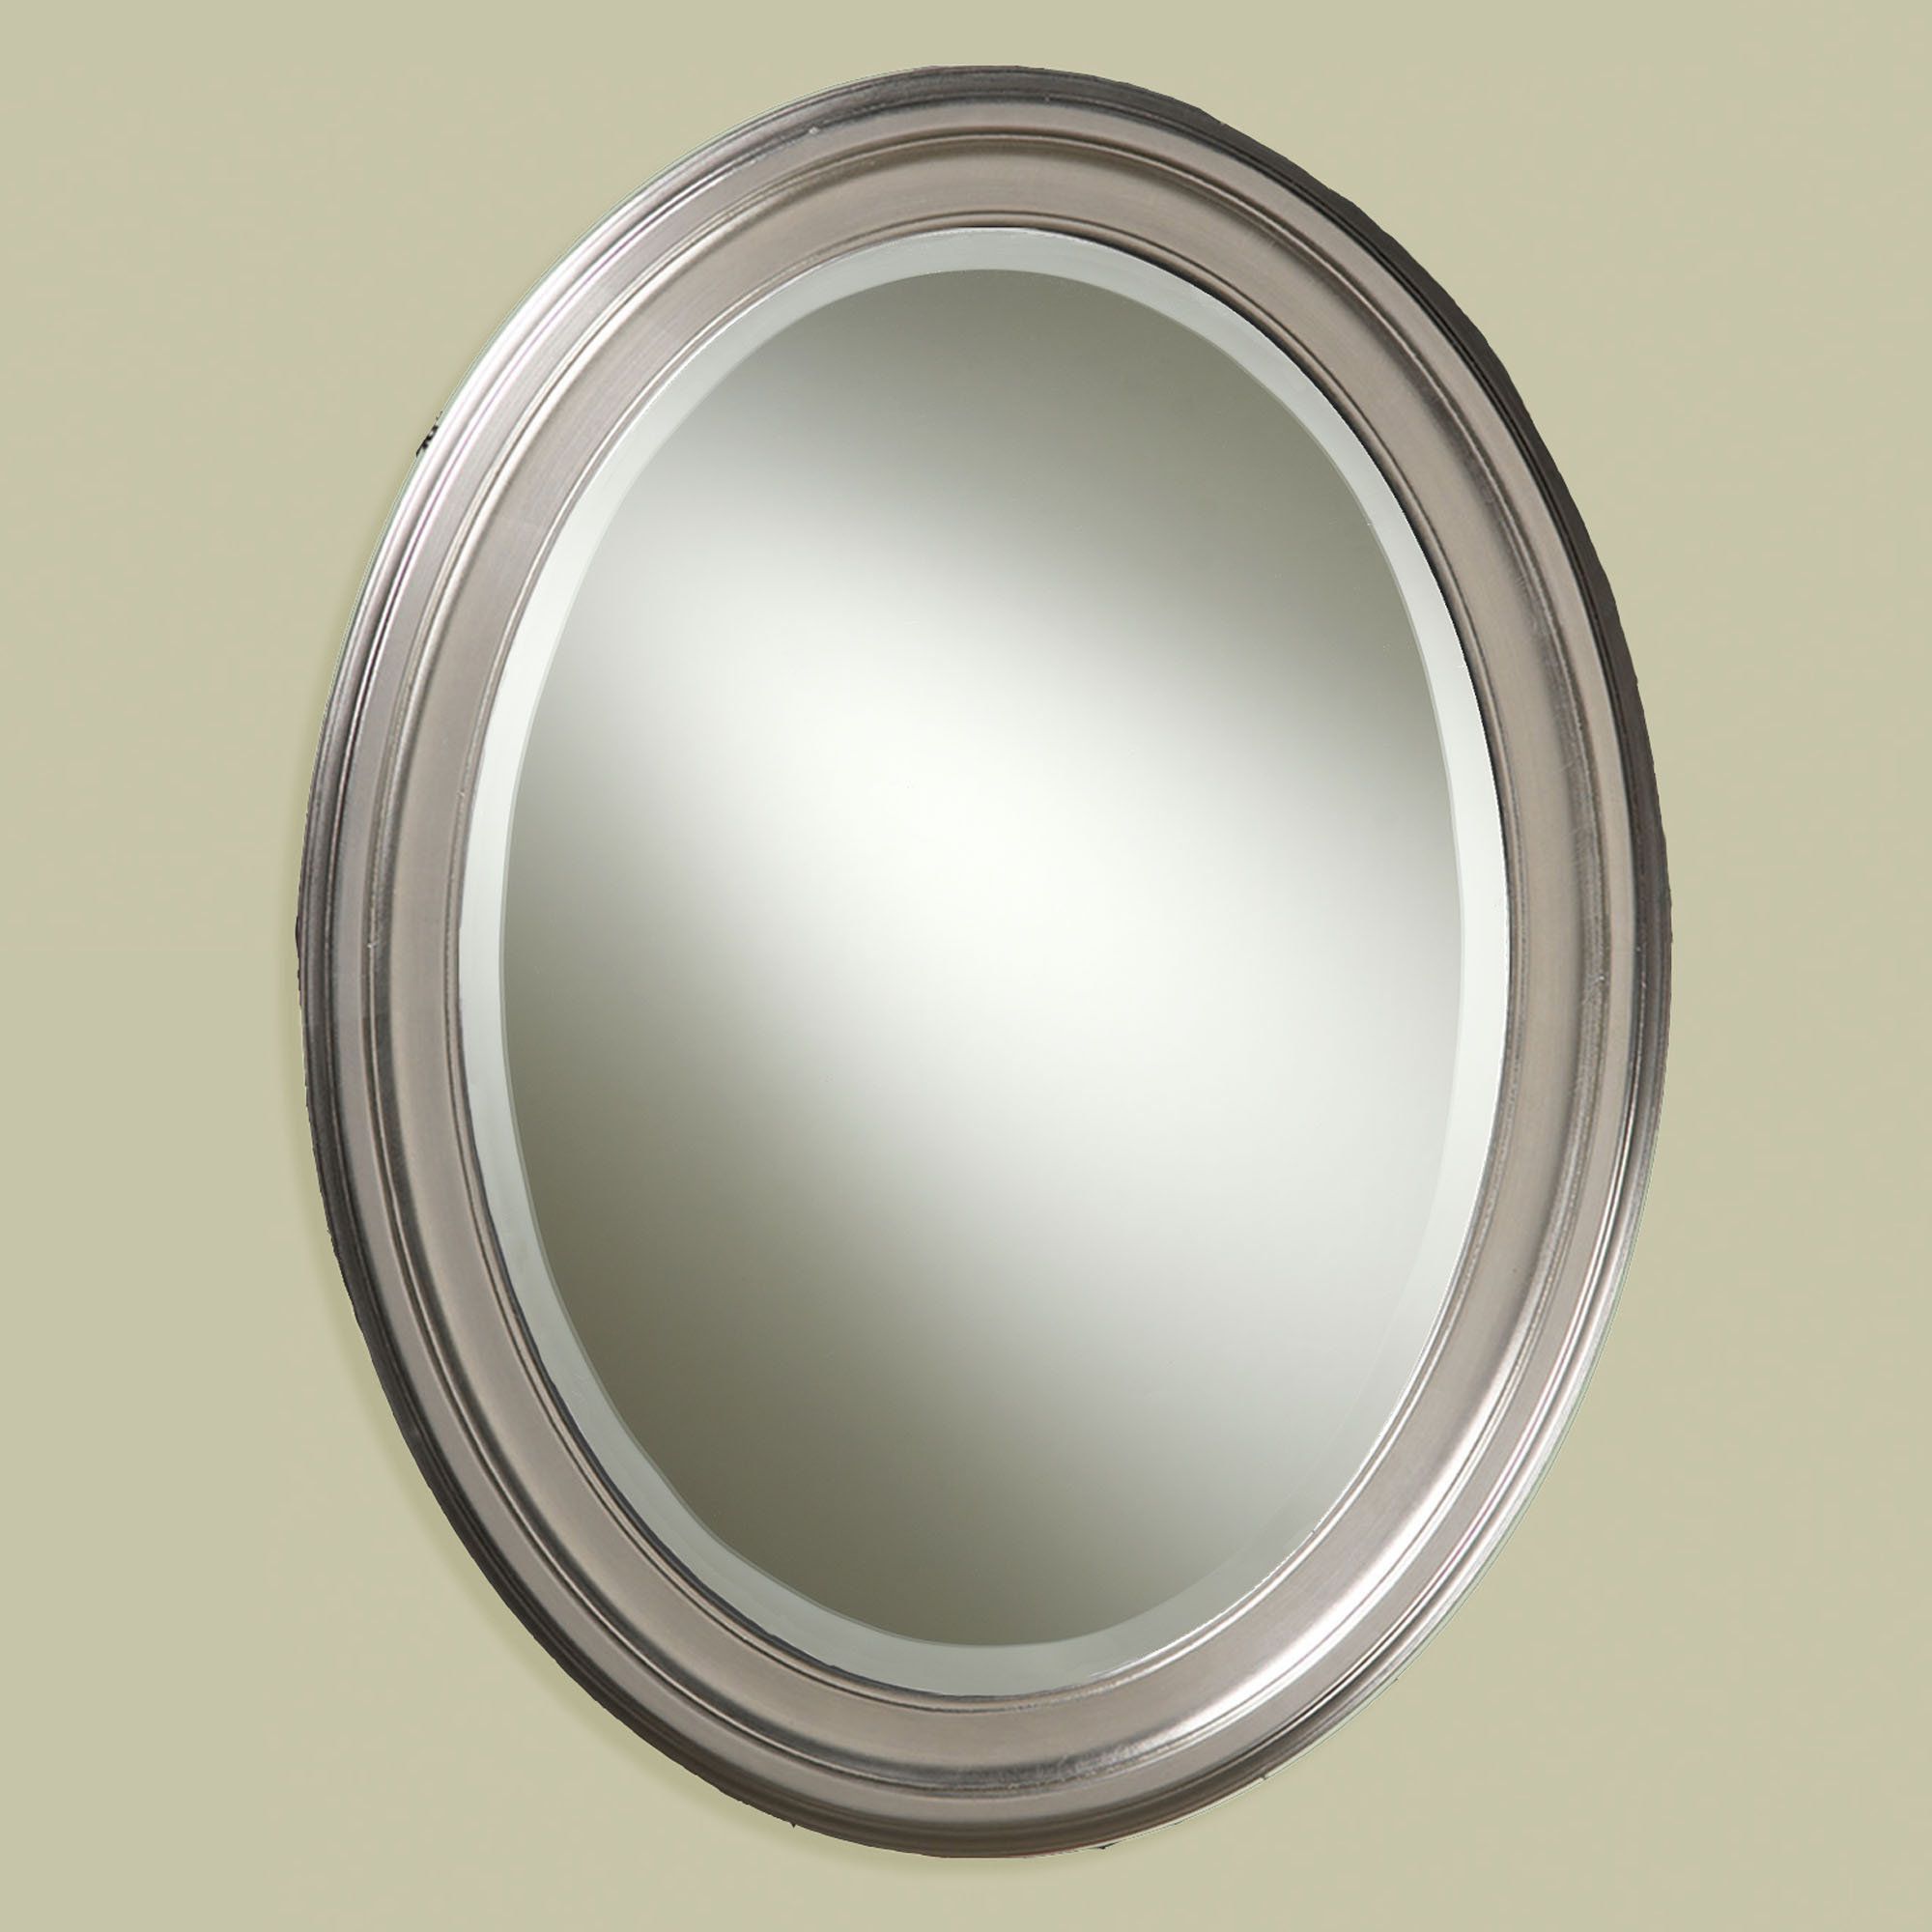 Brushed Nickel Octagon Mirrors Regarding Latest Oval Wall Mirrors (View 2 of 15)